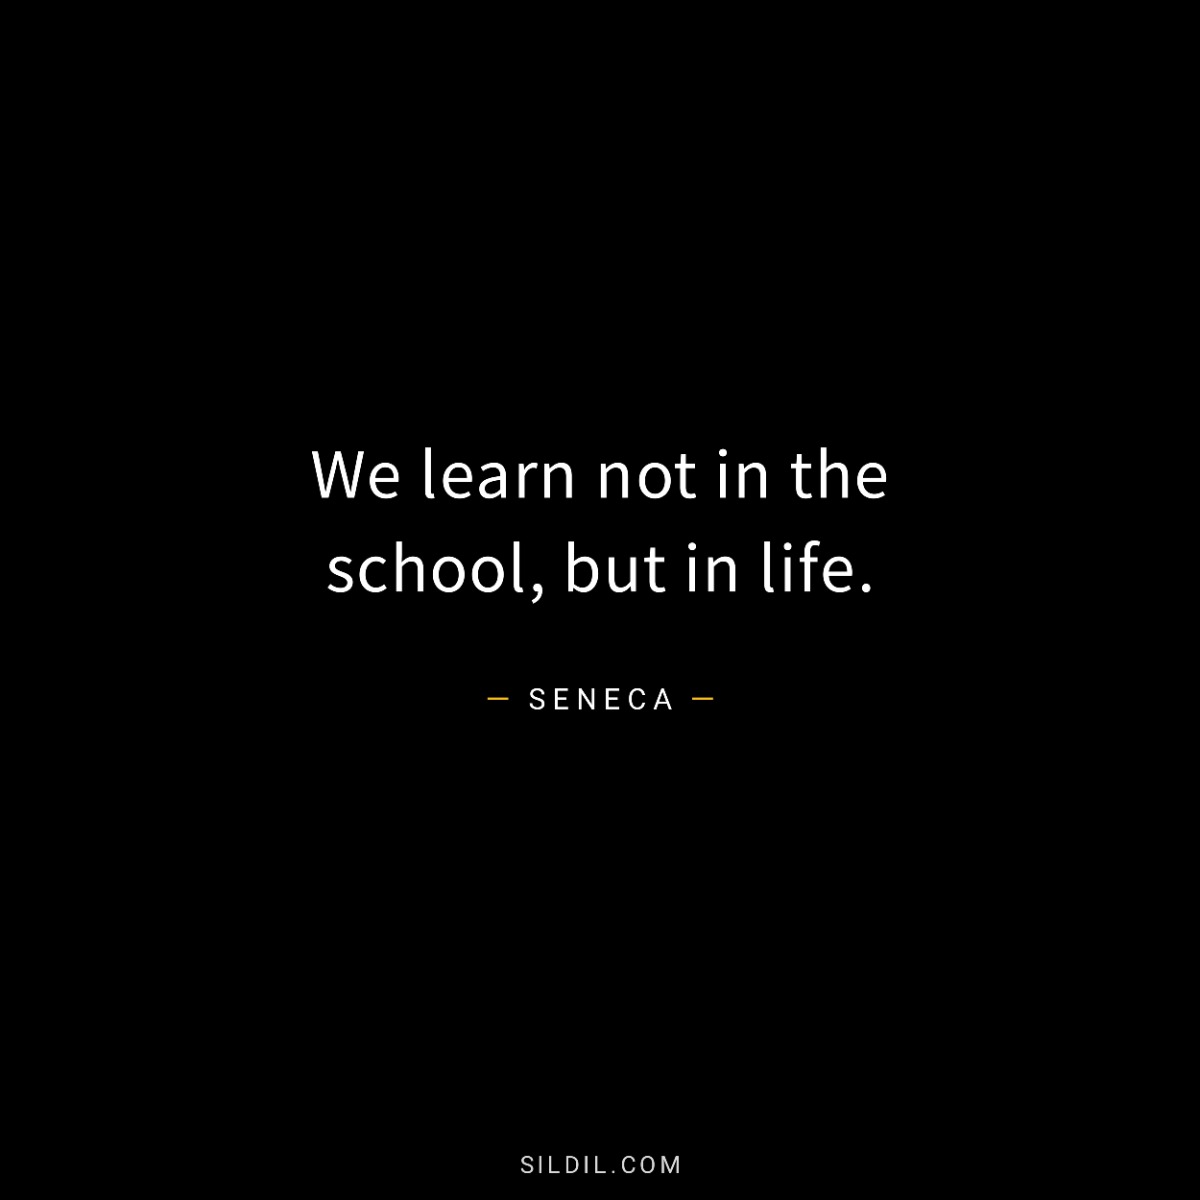 We learn not in the school, but in life.